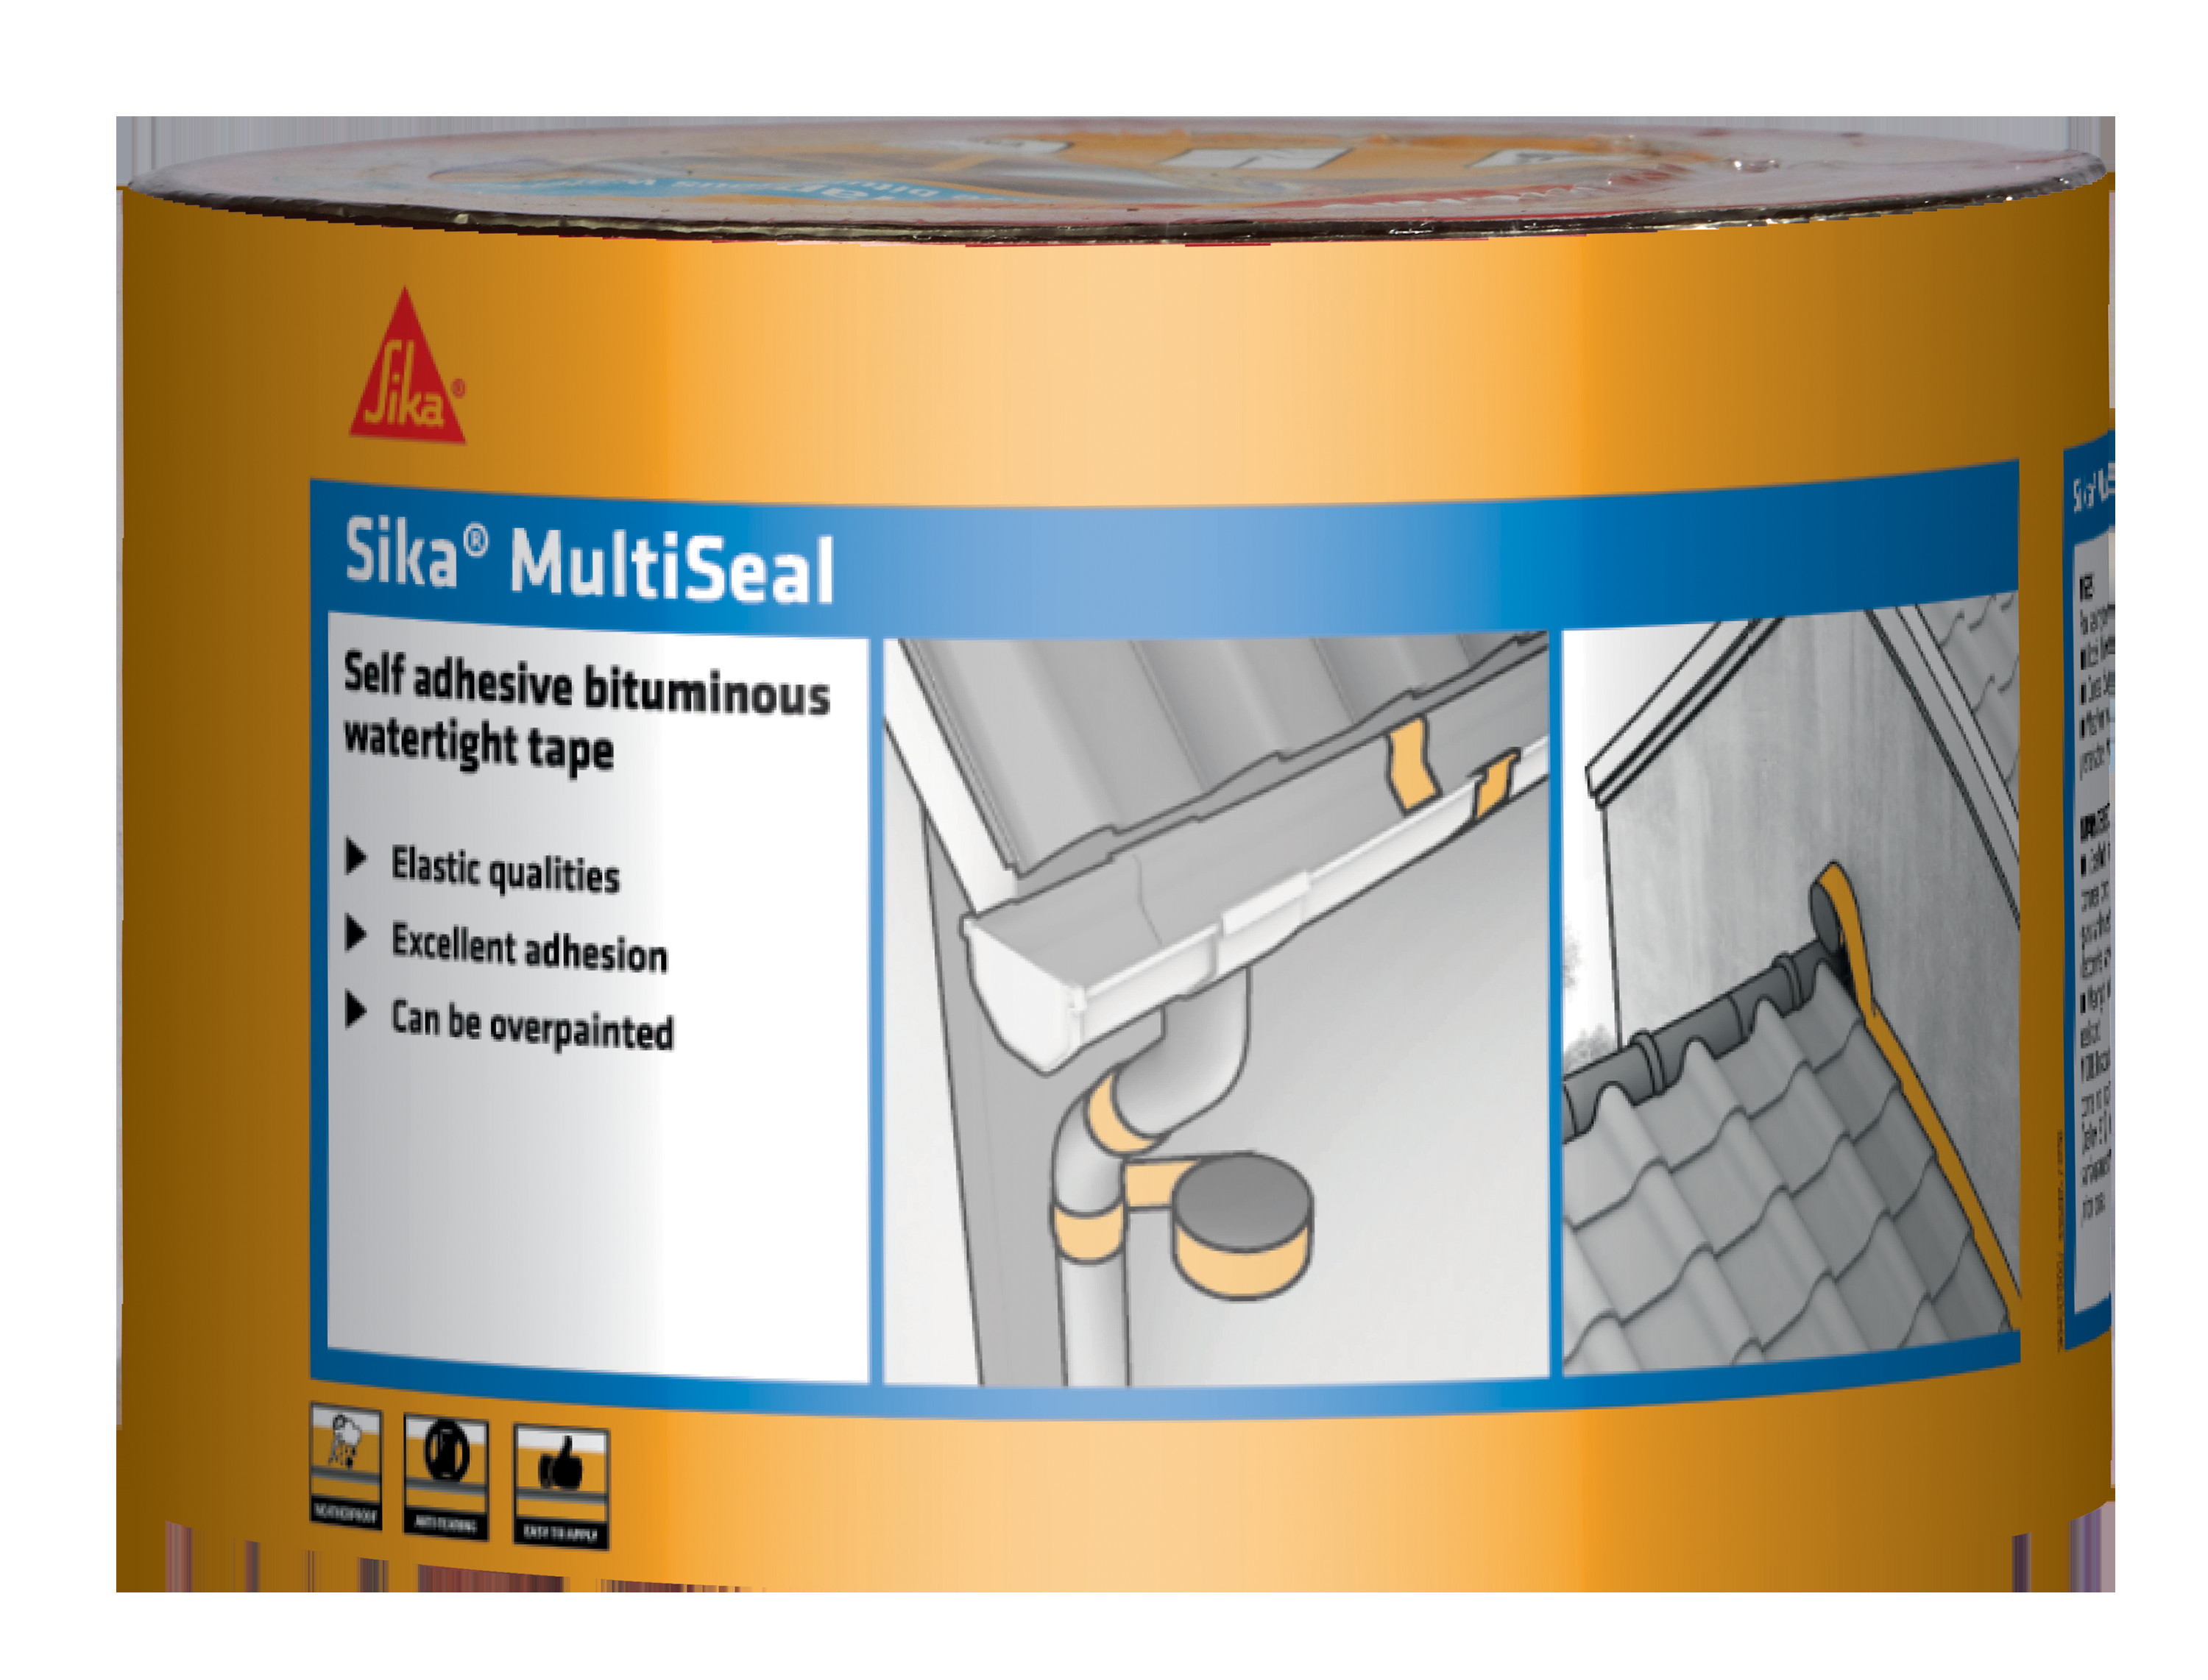 24 Lovely Sika Hardwood Floor Glue 2024 free download sika hardwood floor glue of sika multiseal everbuild with regard to sika multiseal is a self adhesive bituminous sealing tape for the sealing of cracks and joints in many common domestic and